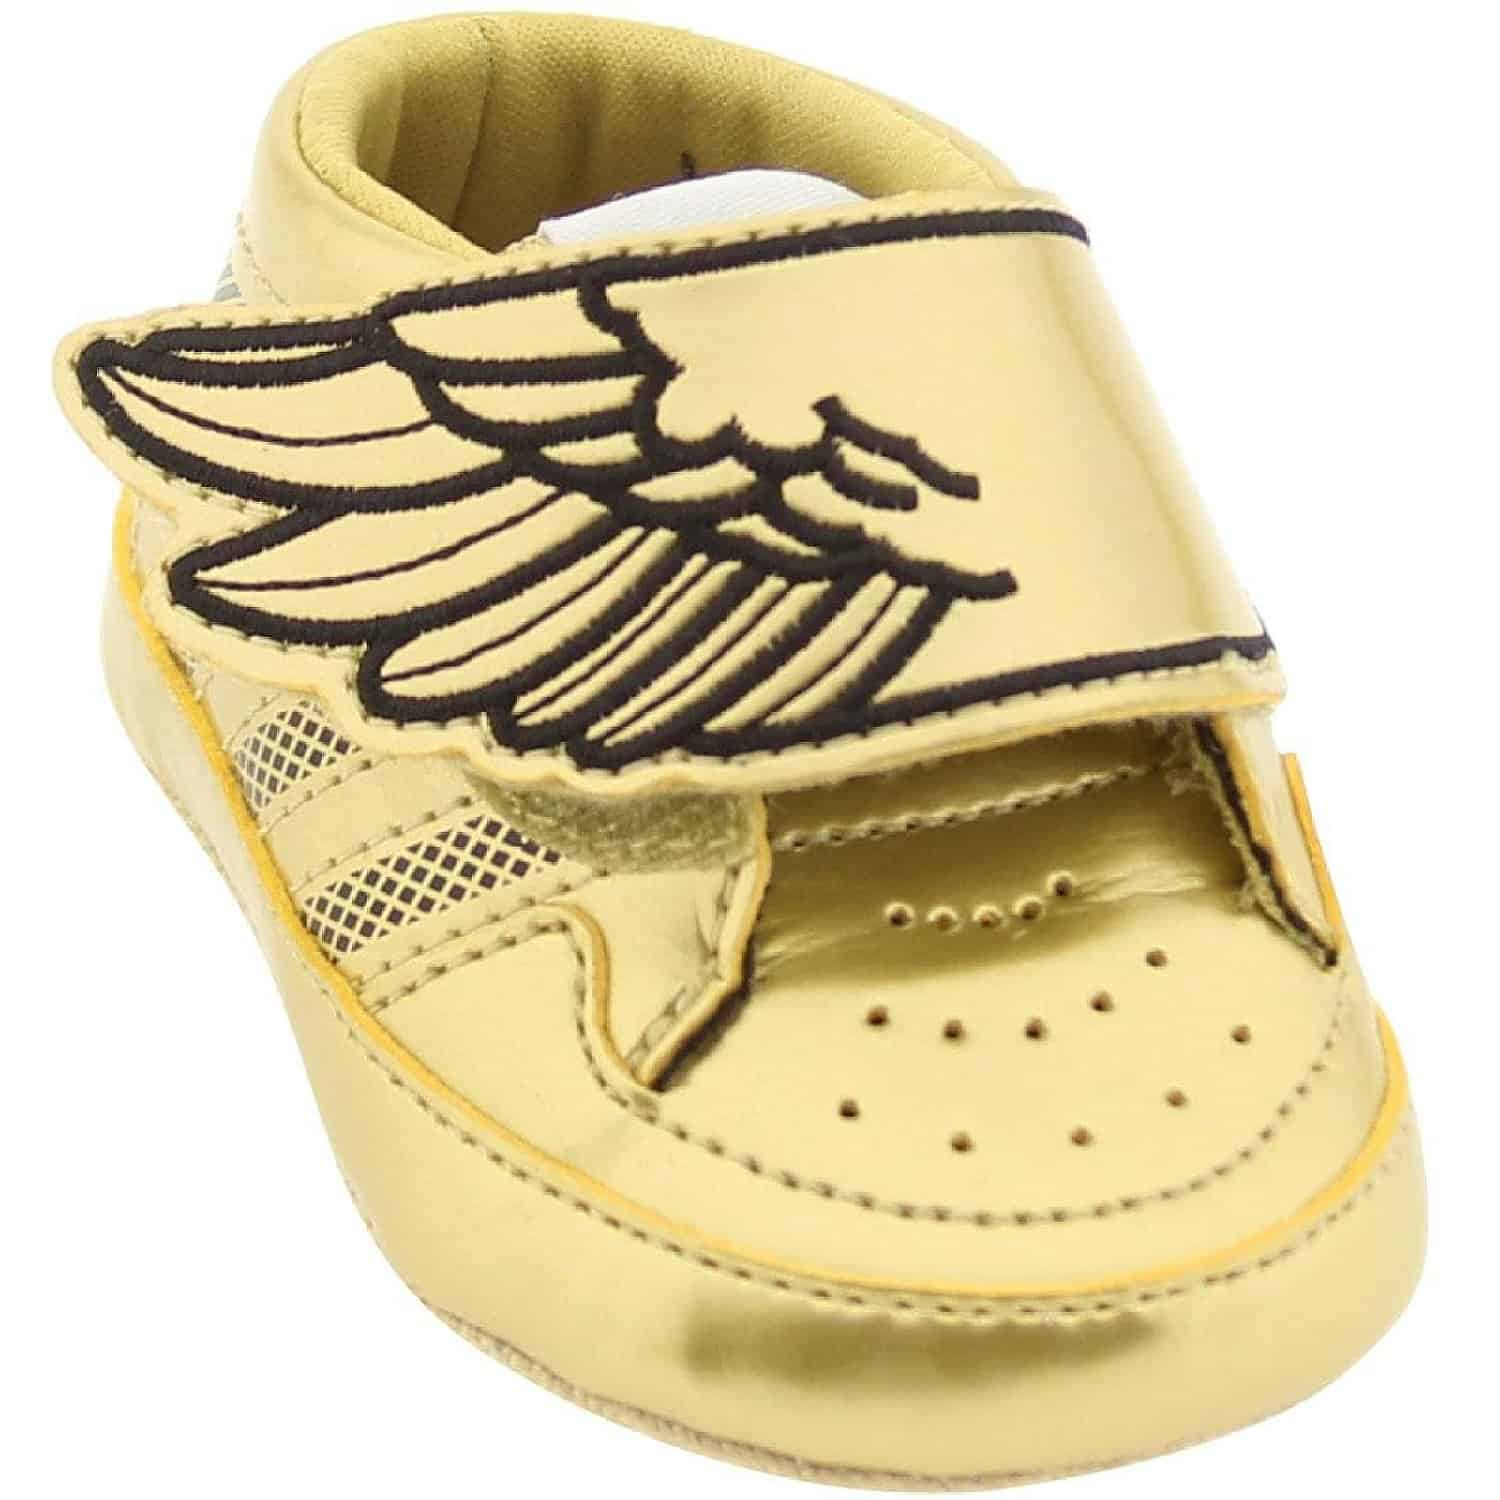 Adidas Jeremy Scott Wings Cribpack Infant Shoes Cool Baby Gift Idea